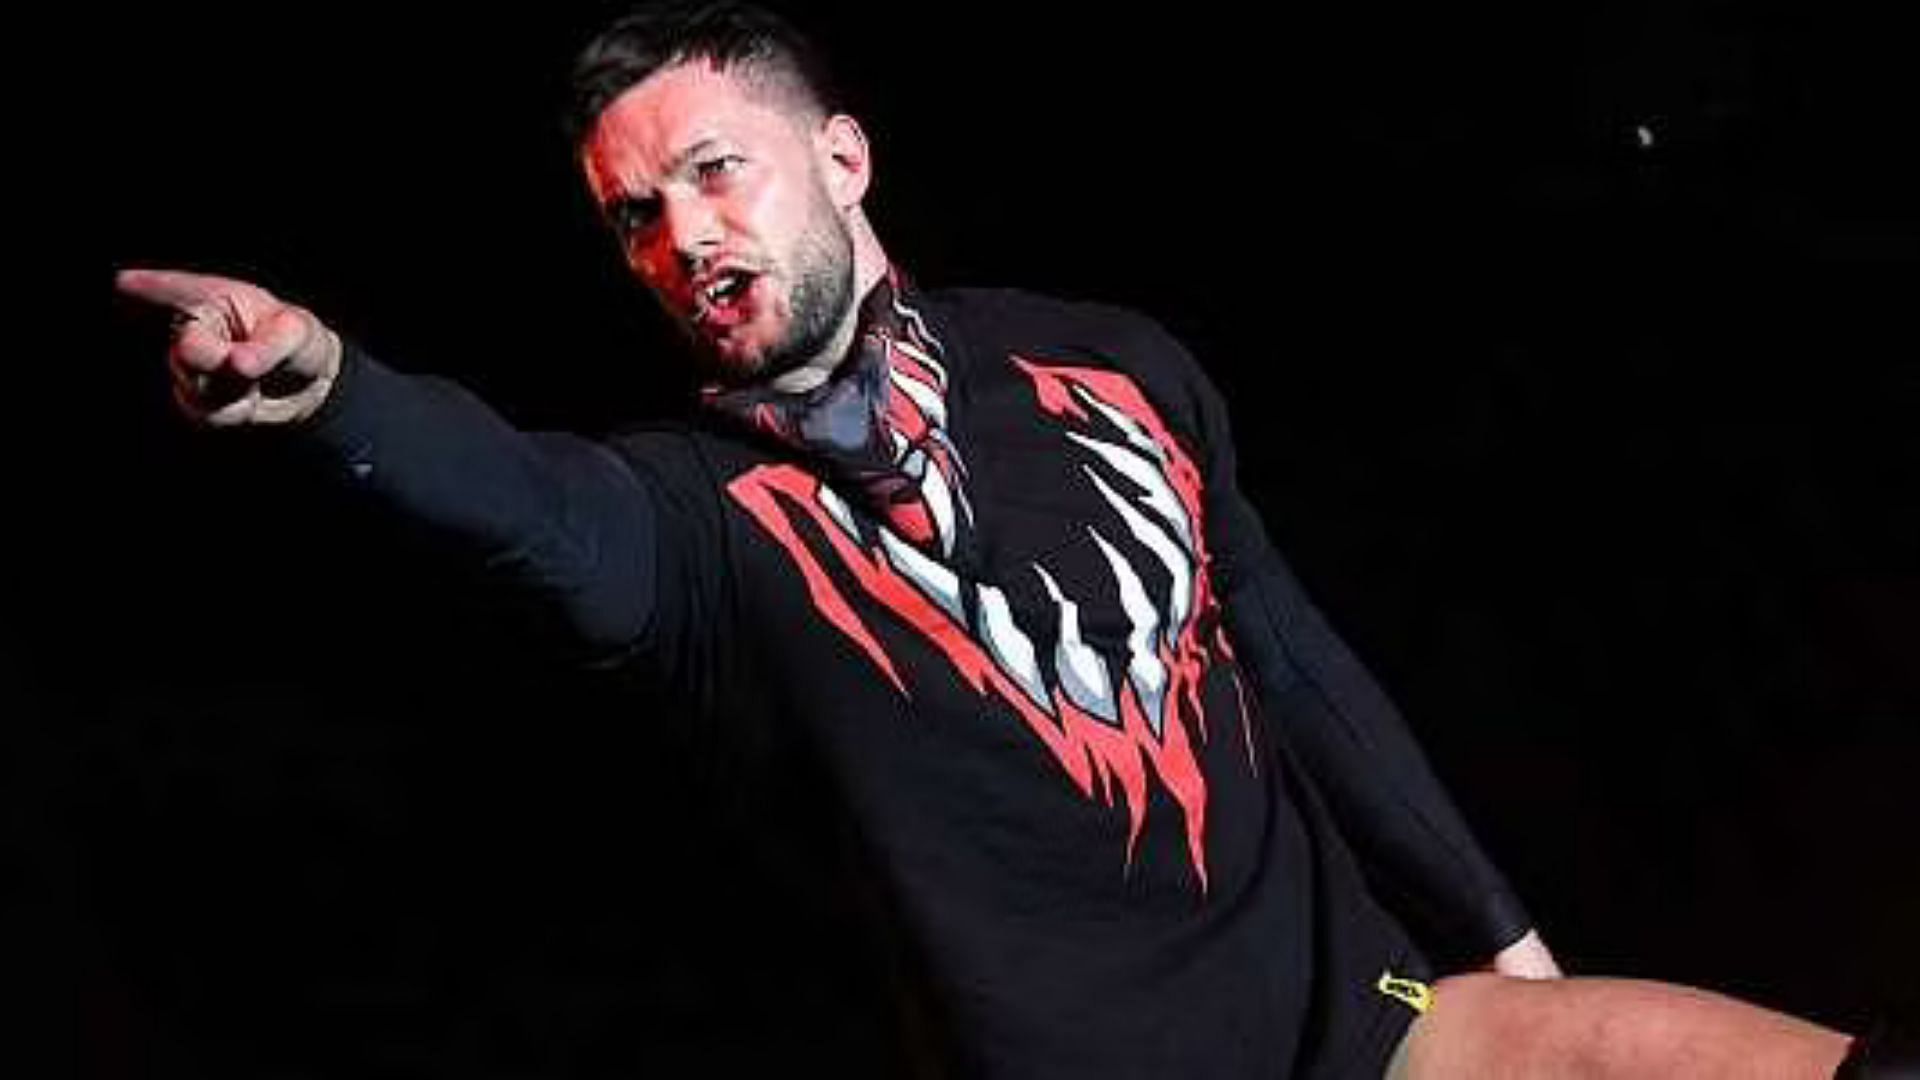 Balor and Benoit have a connection